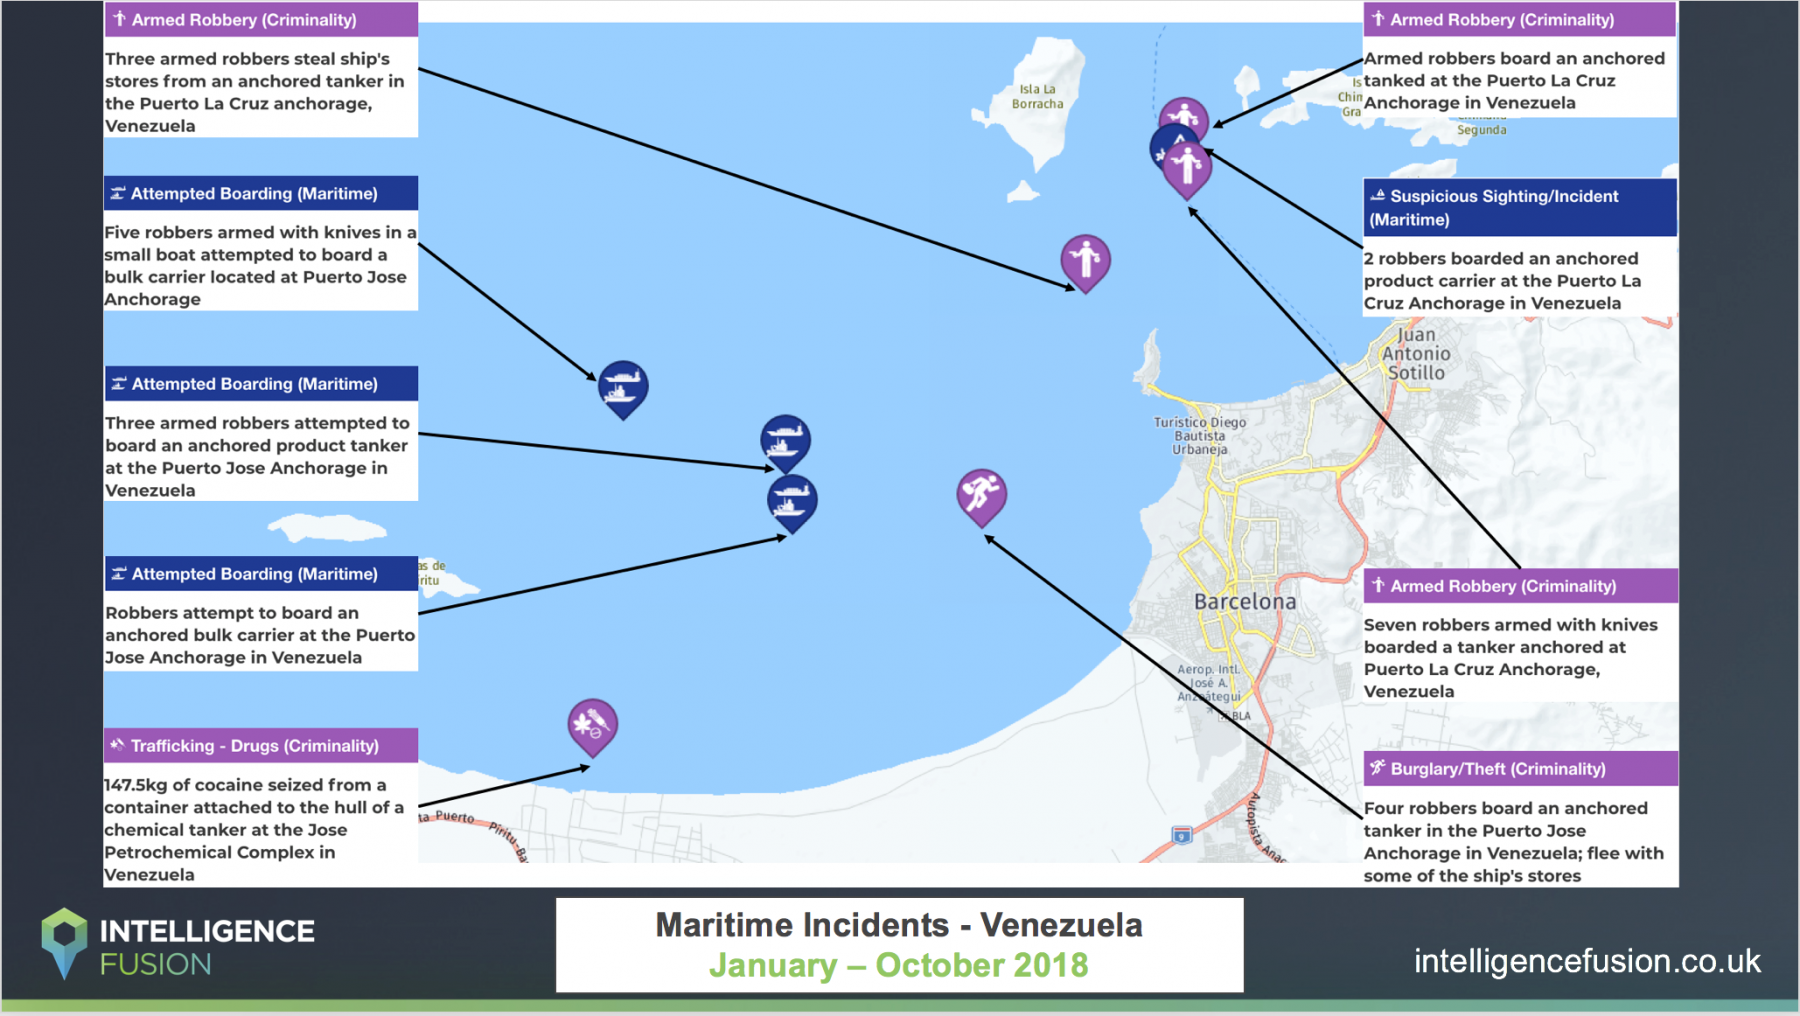 A map of the maritime threats and related incidents across Venezuela during September of 2018